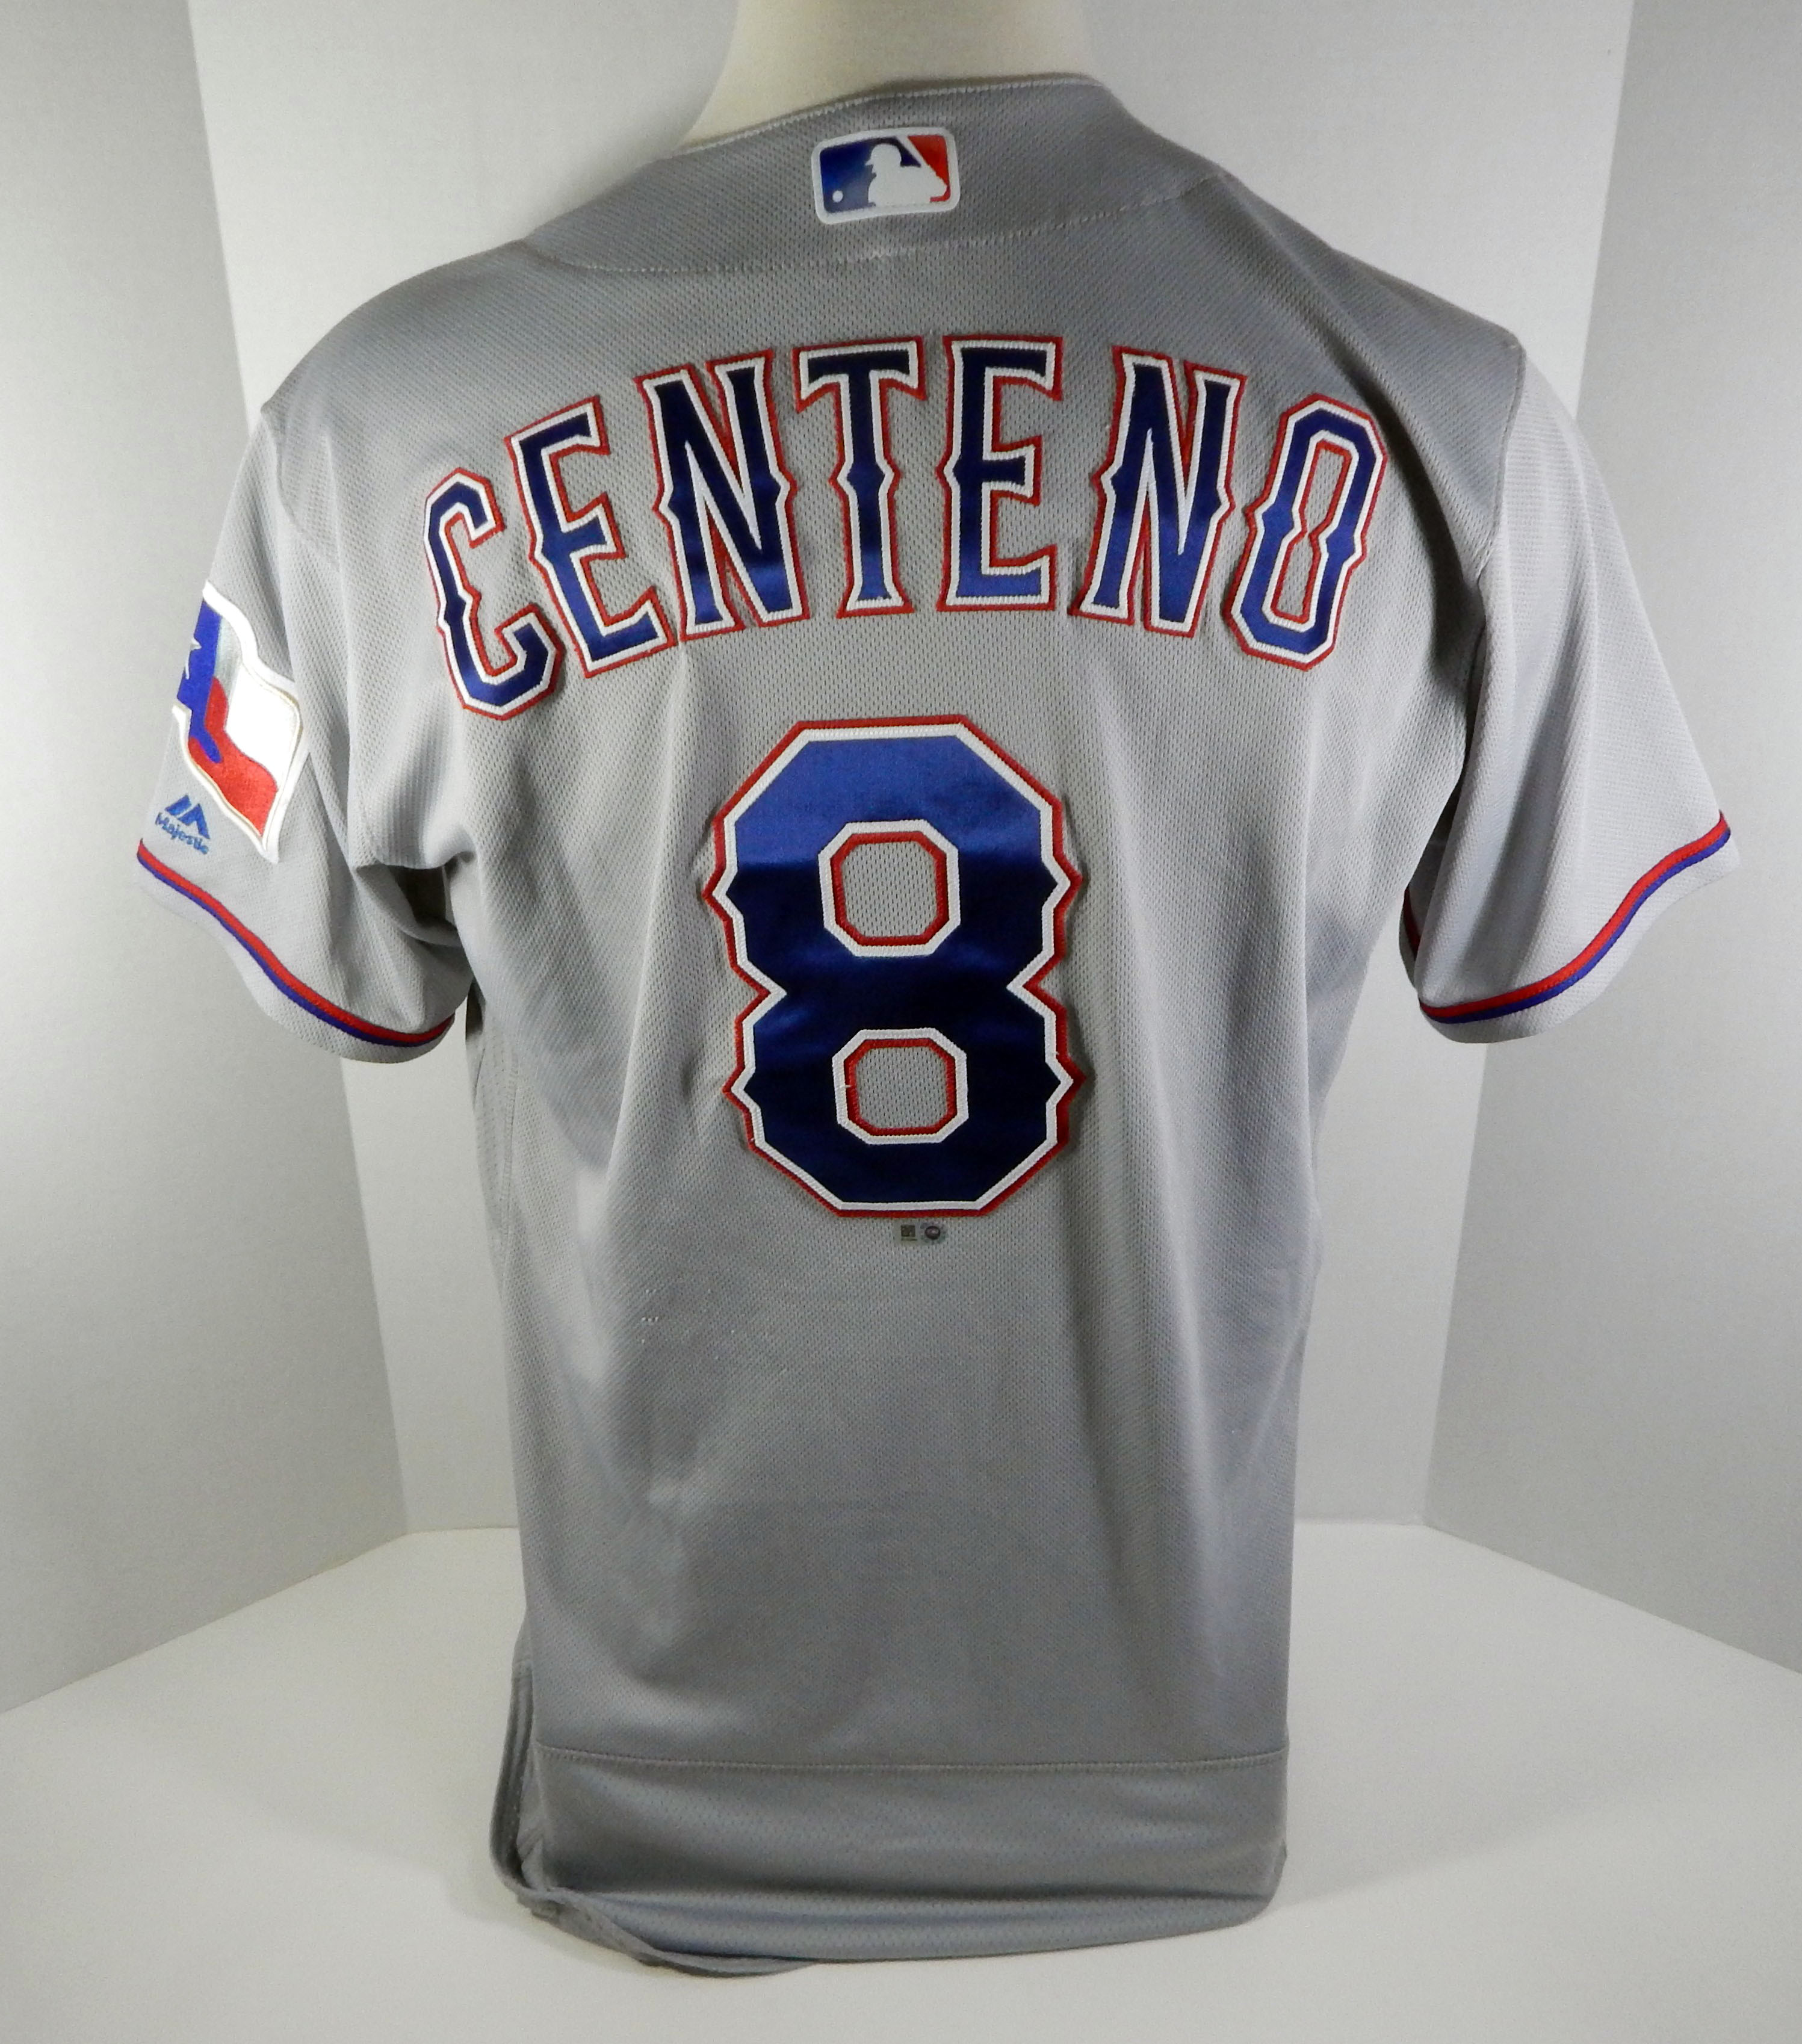 Juan Centeno #8 Game Issued Grey Jersey 